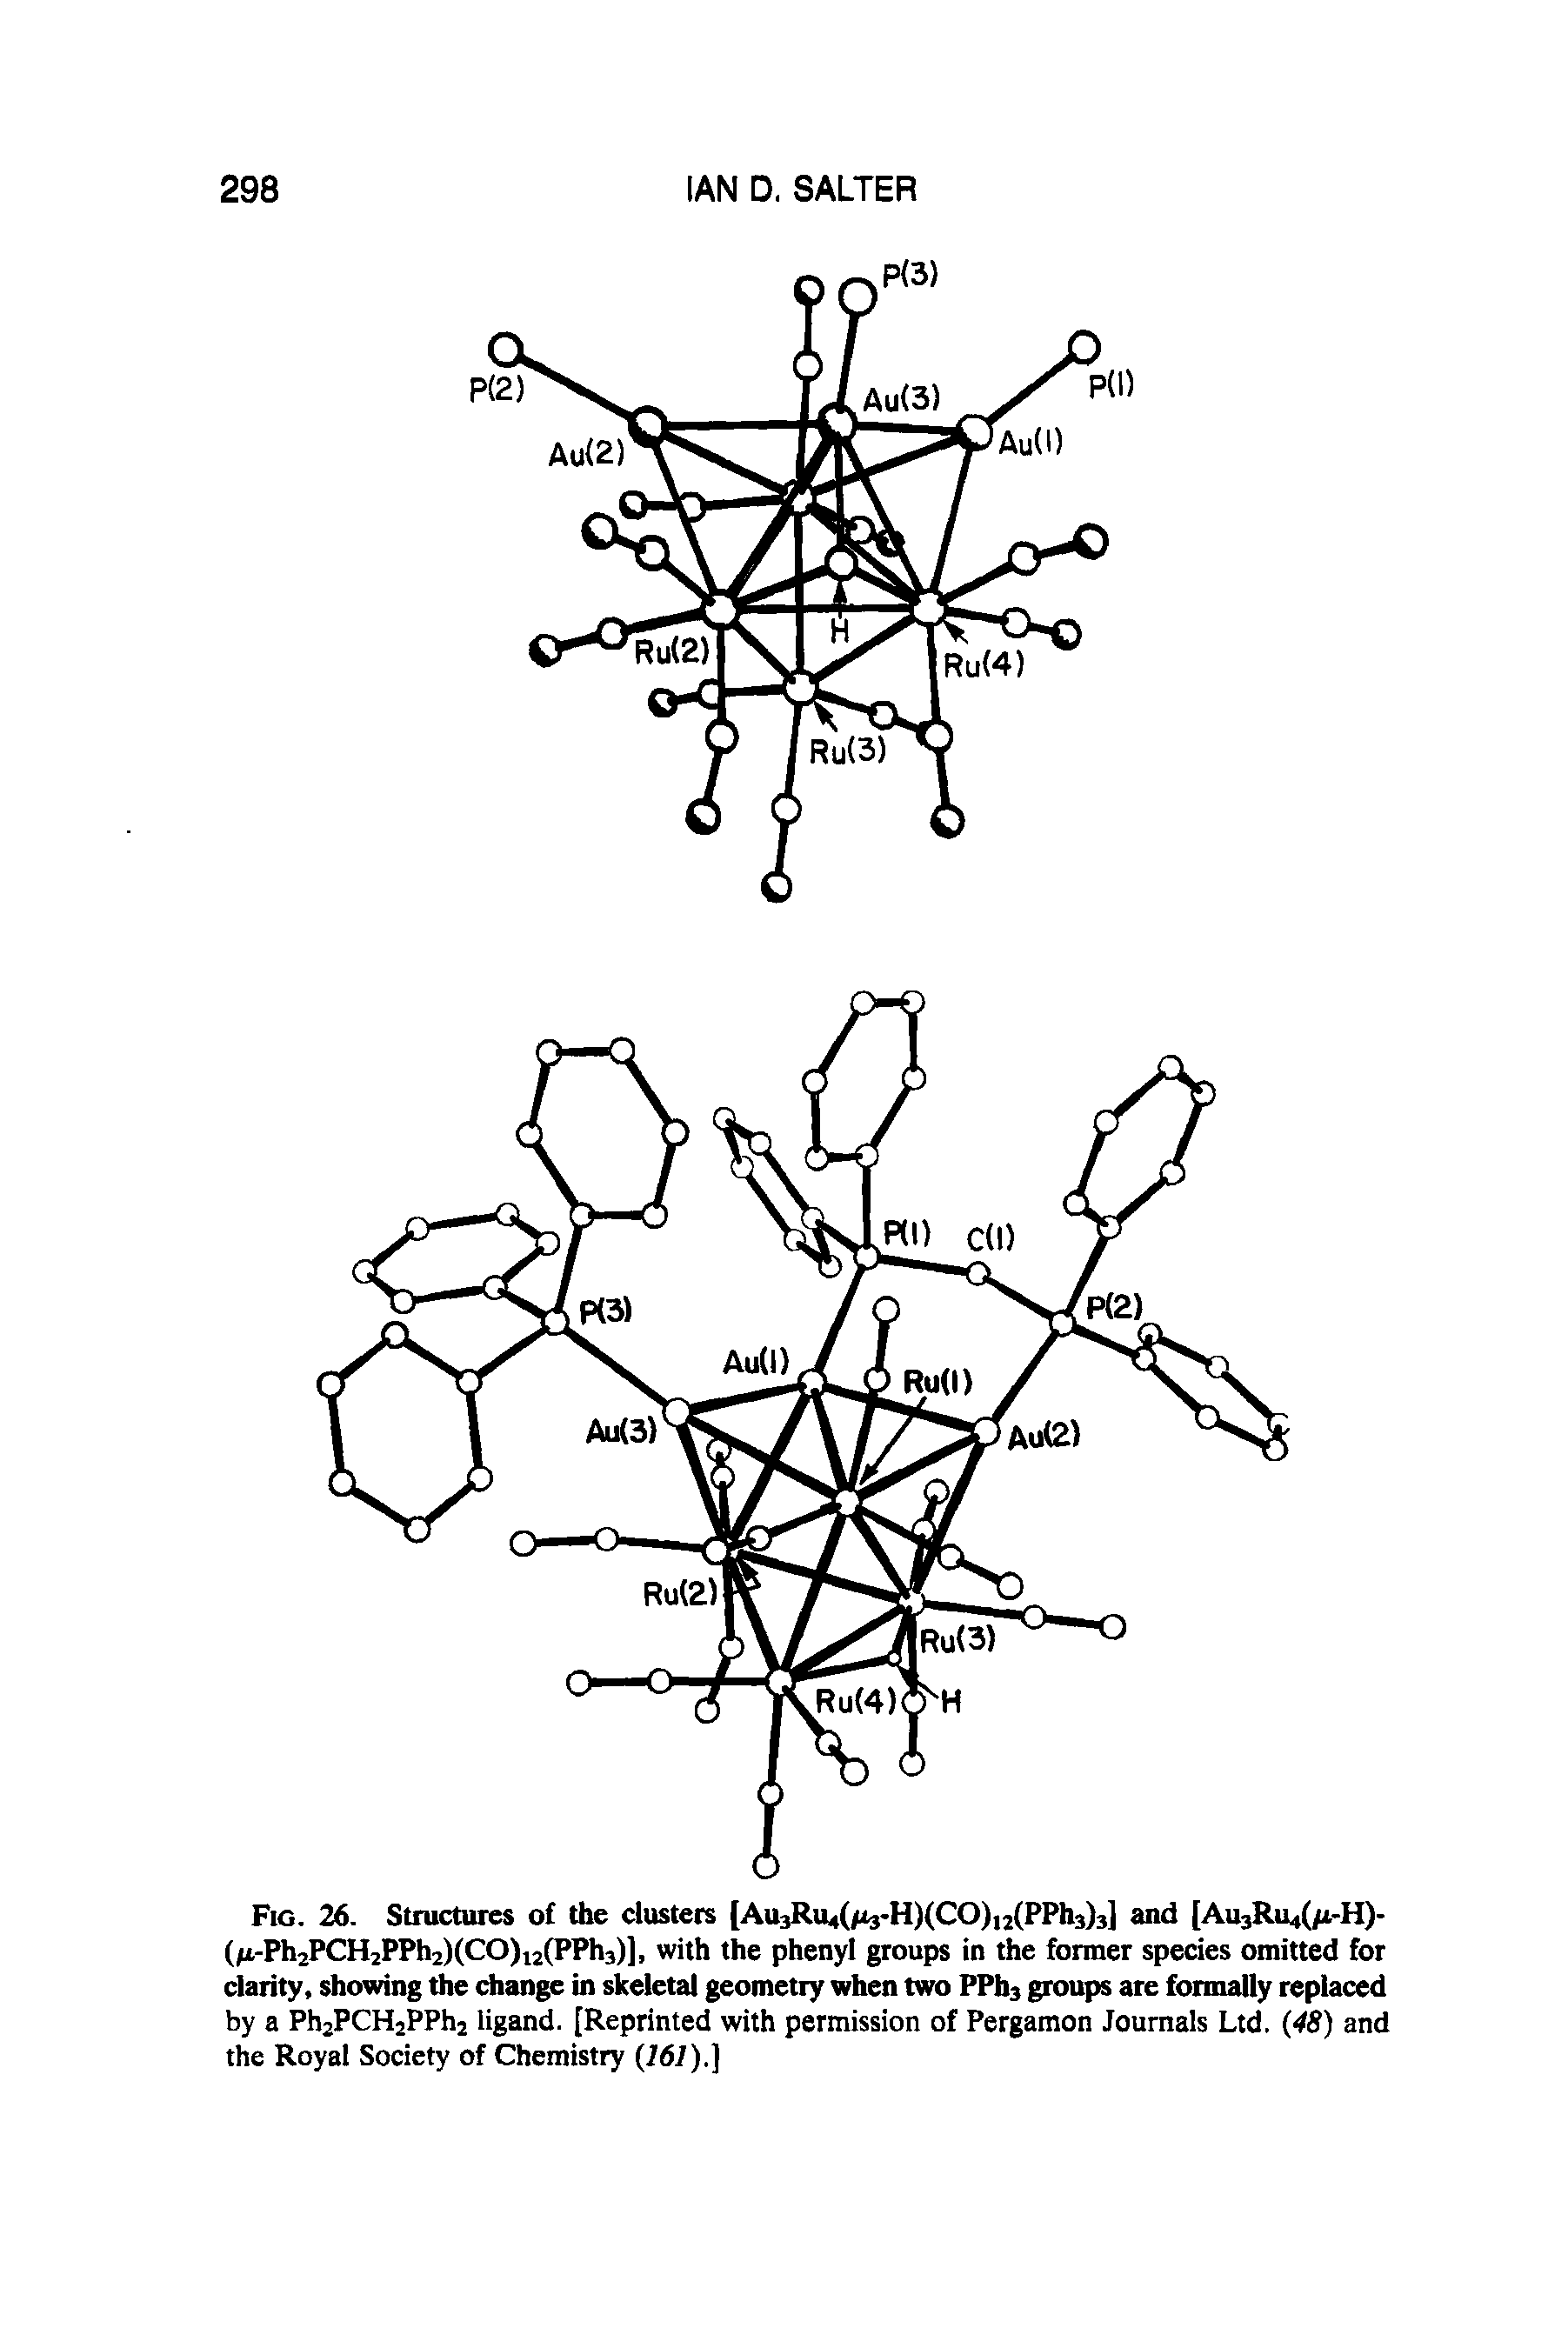 Fig. 26. Structures of the clusters [Au3Ru4(/i3-H)(CO)12(PPh3)3] and [Au3Ru4(/a-H)-(li-Ph2PCH2PPh2)(CO)12(PPh3)], with the phenyl groups in the former species omitted for clarity, showing the change in skeletal geometry when two PPh3 groups are formally replaced...